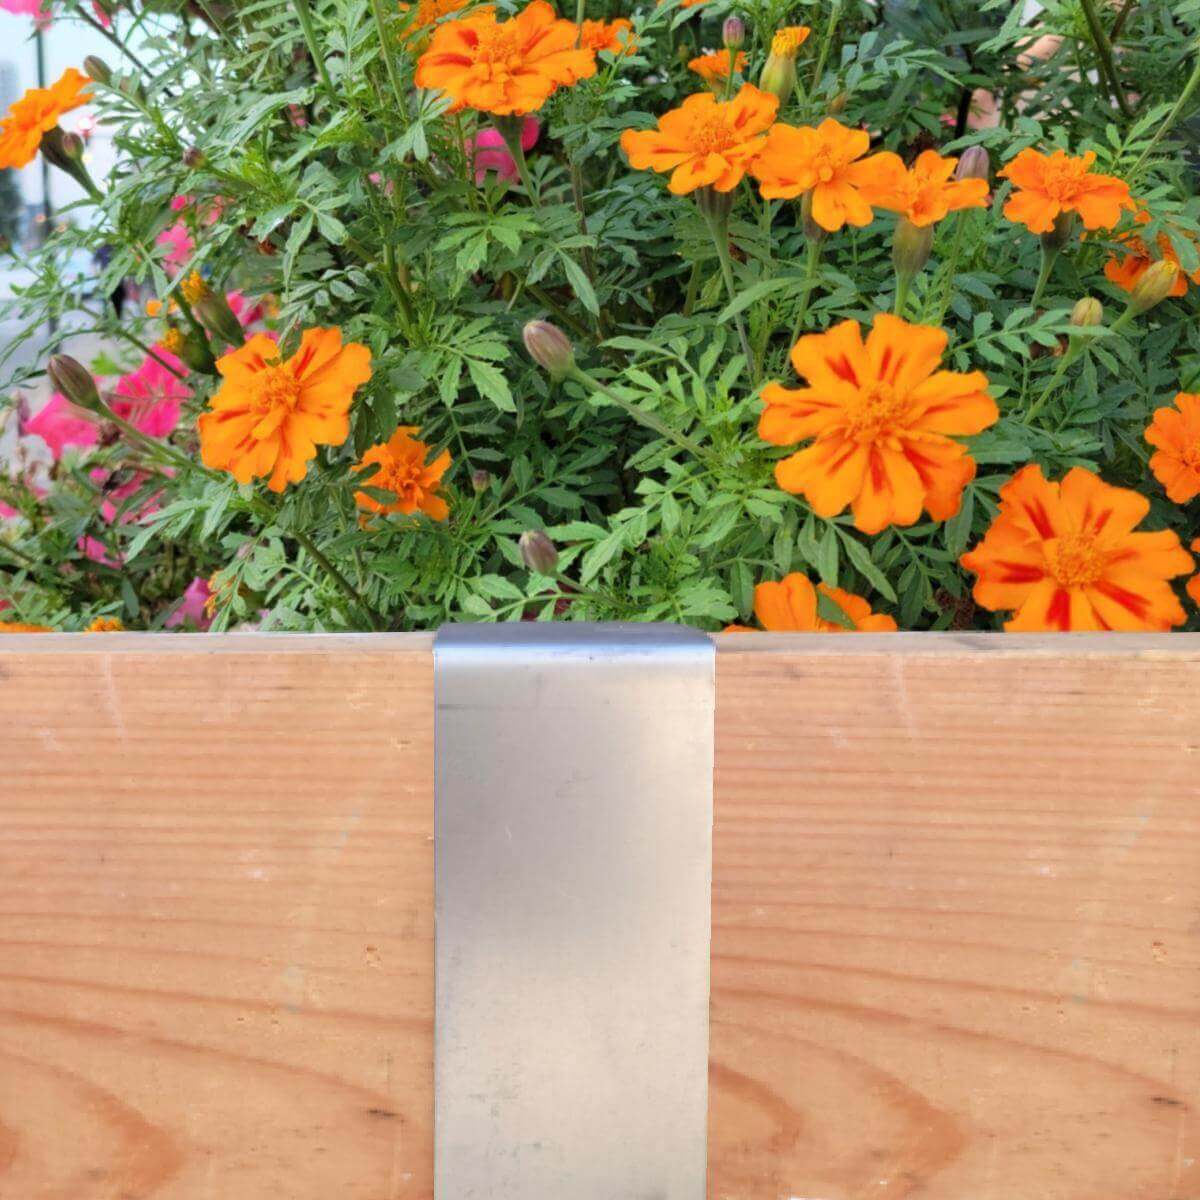 Rustic steel 2xEDGE staple installed on treated lumber to create flower bed with marigolds.